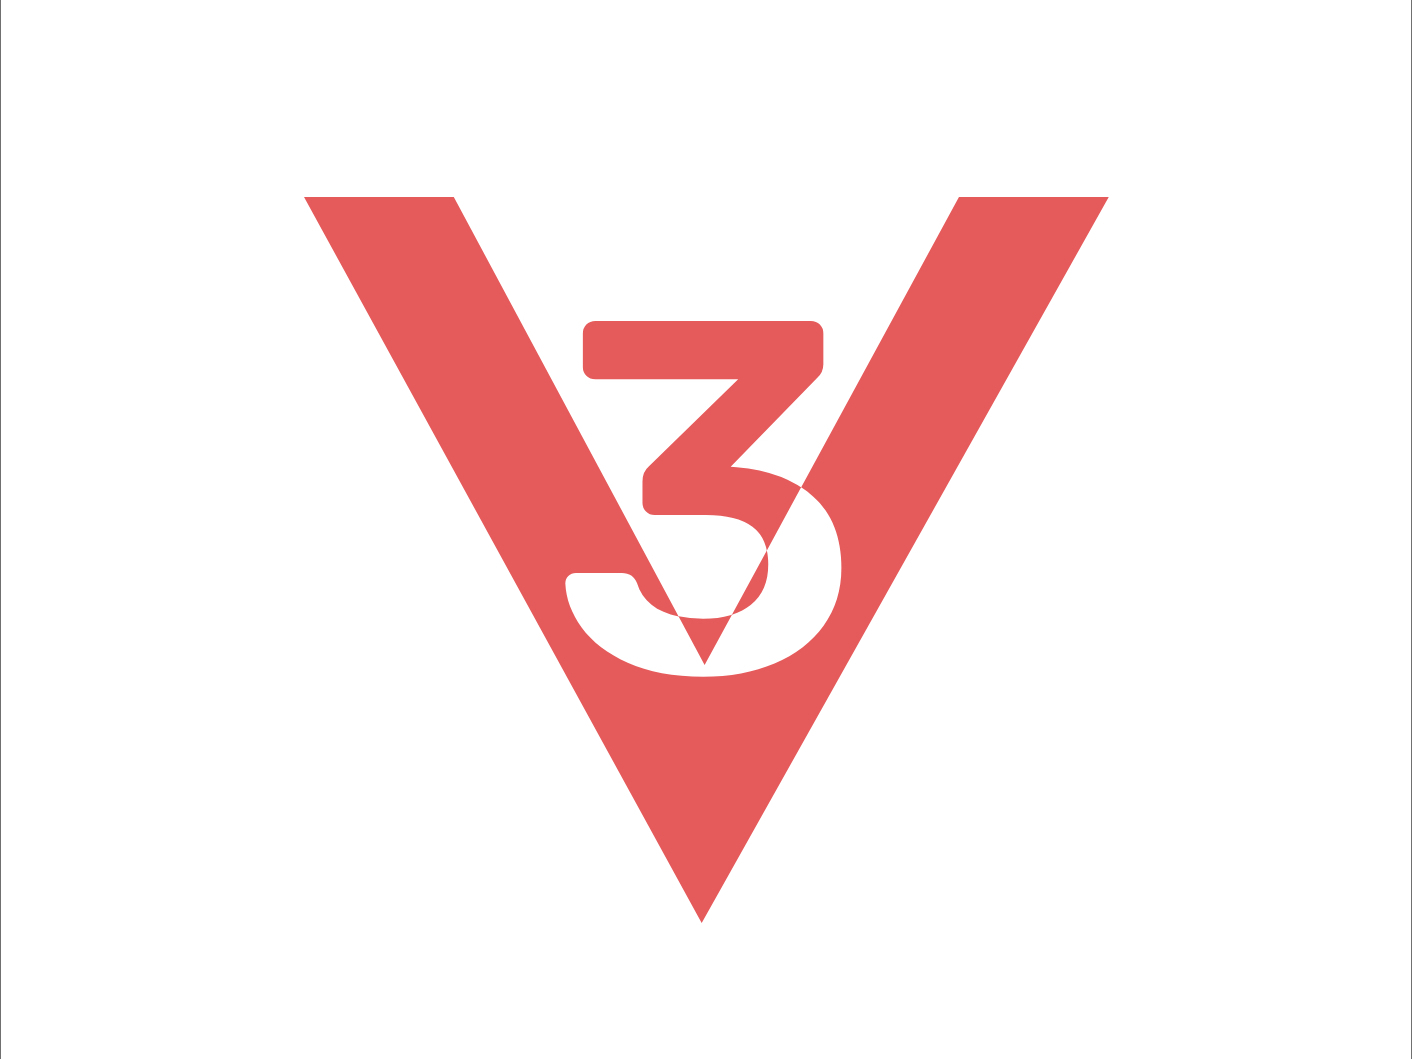 Logo for v3 by cheralathan on Dribbble